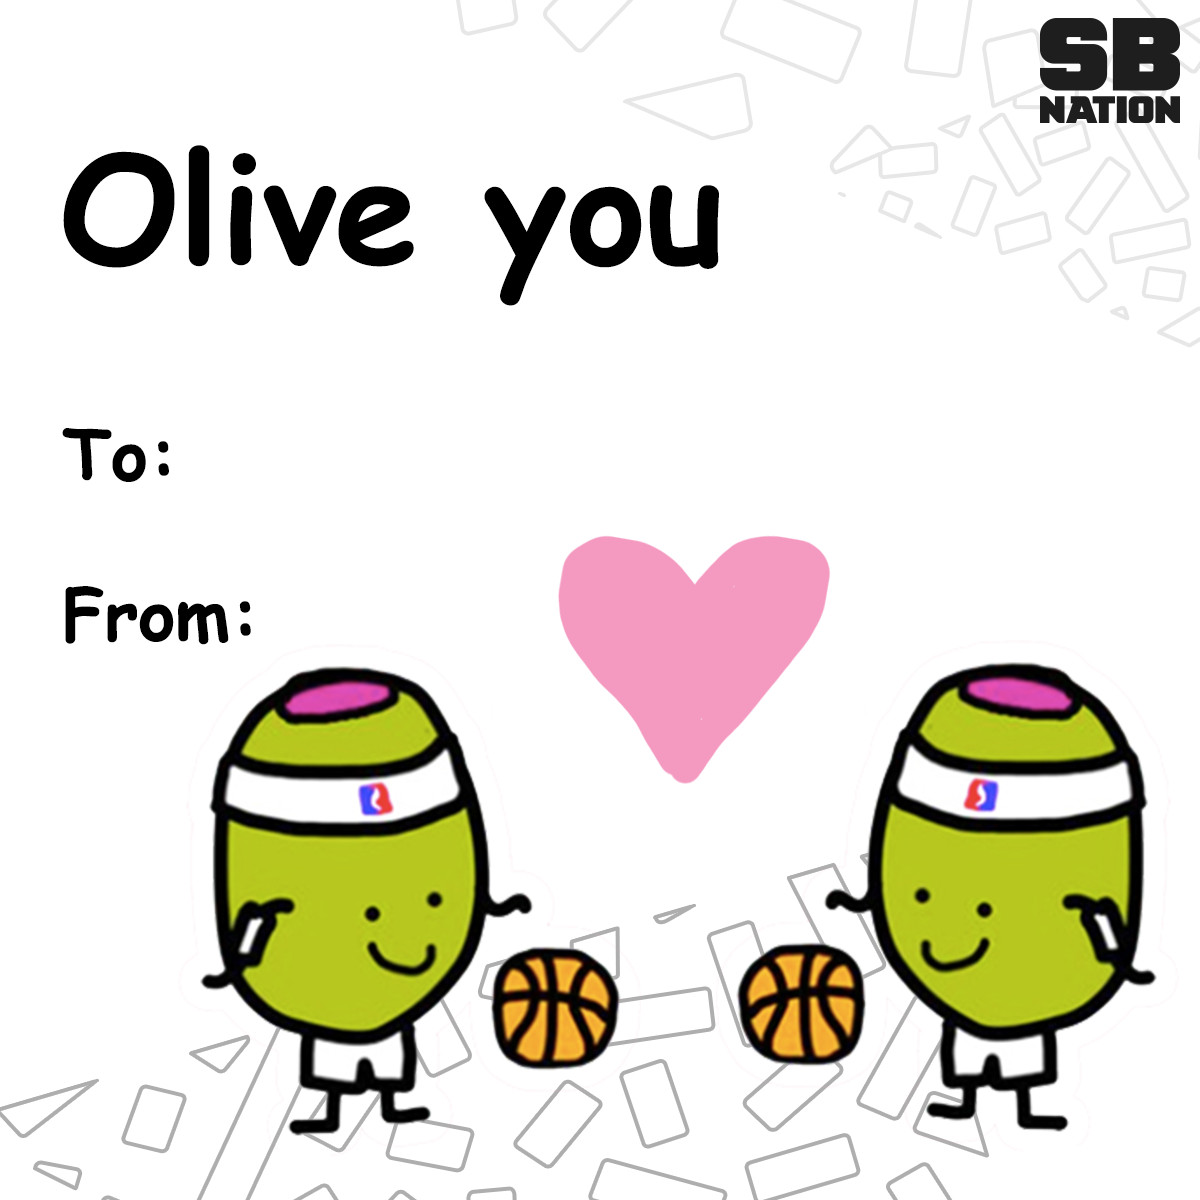 Image of the SB Nation olive meme with the text “Olive you”